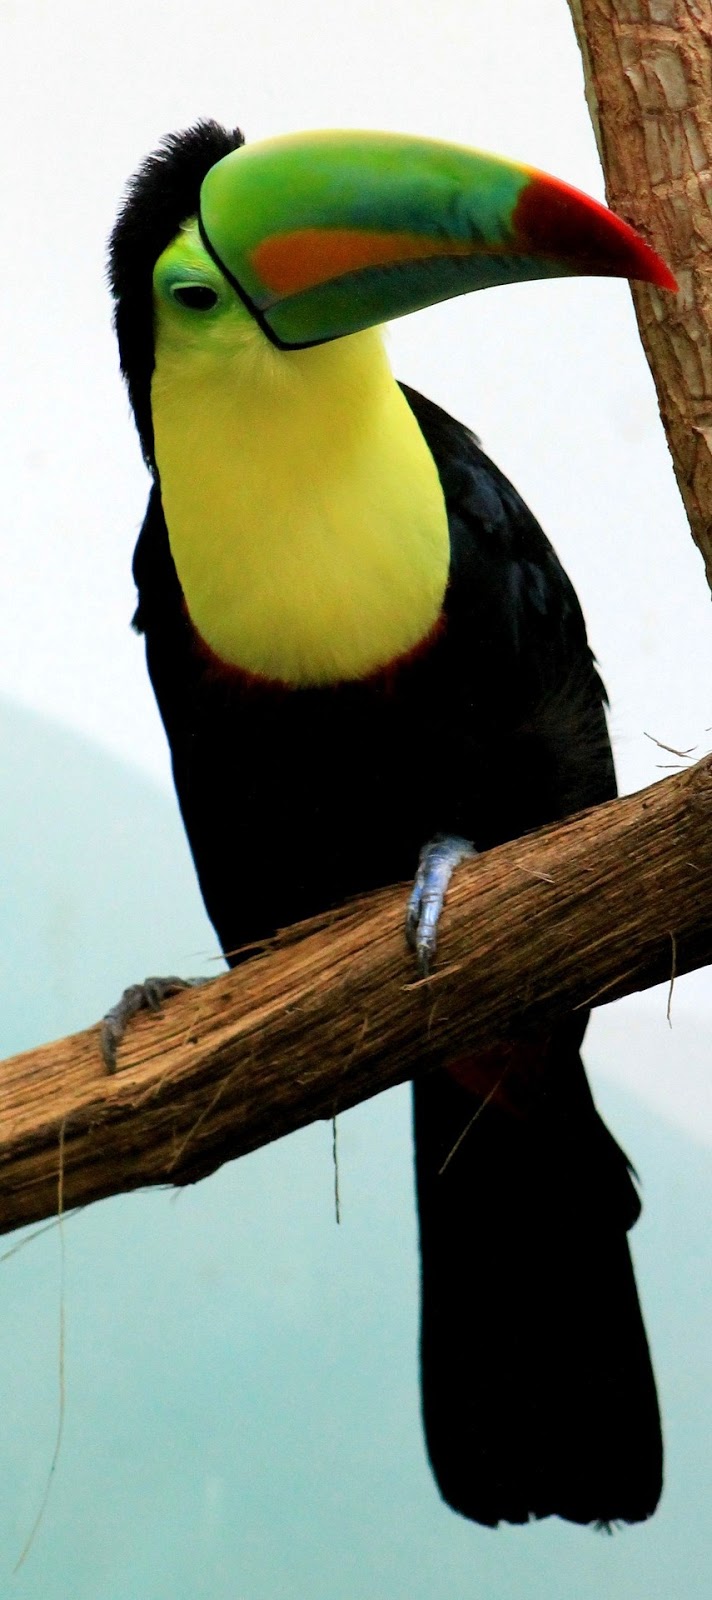 Picture of a colorful toucan.